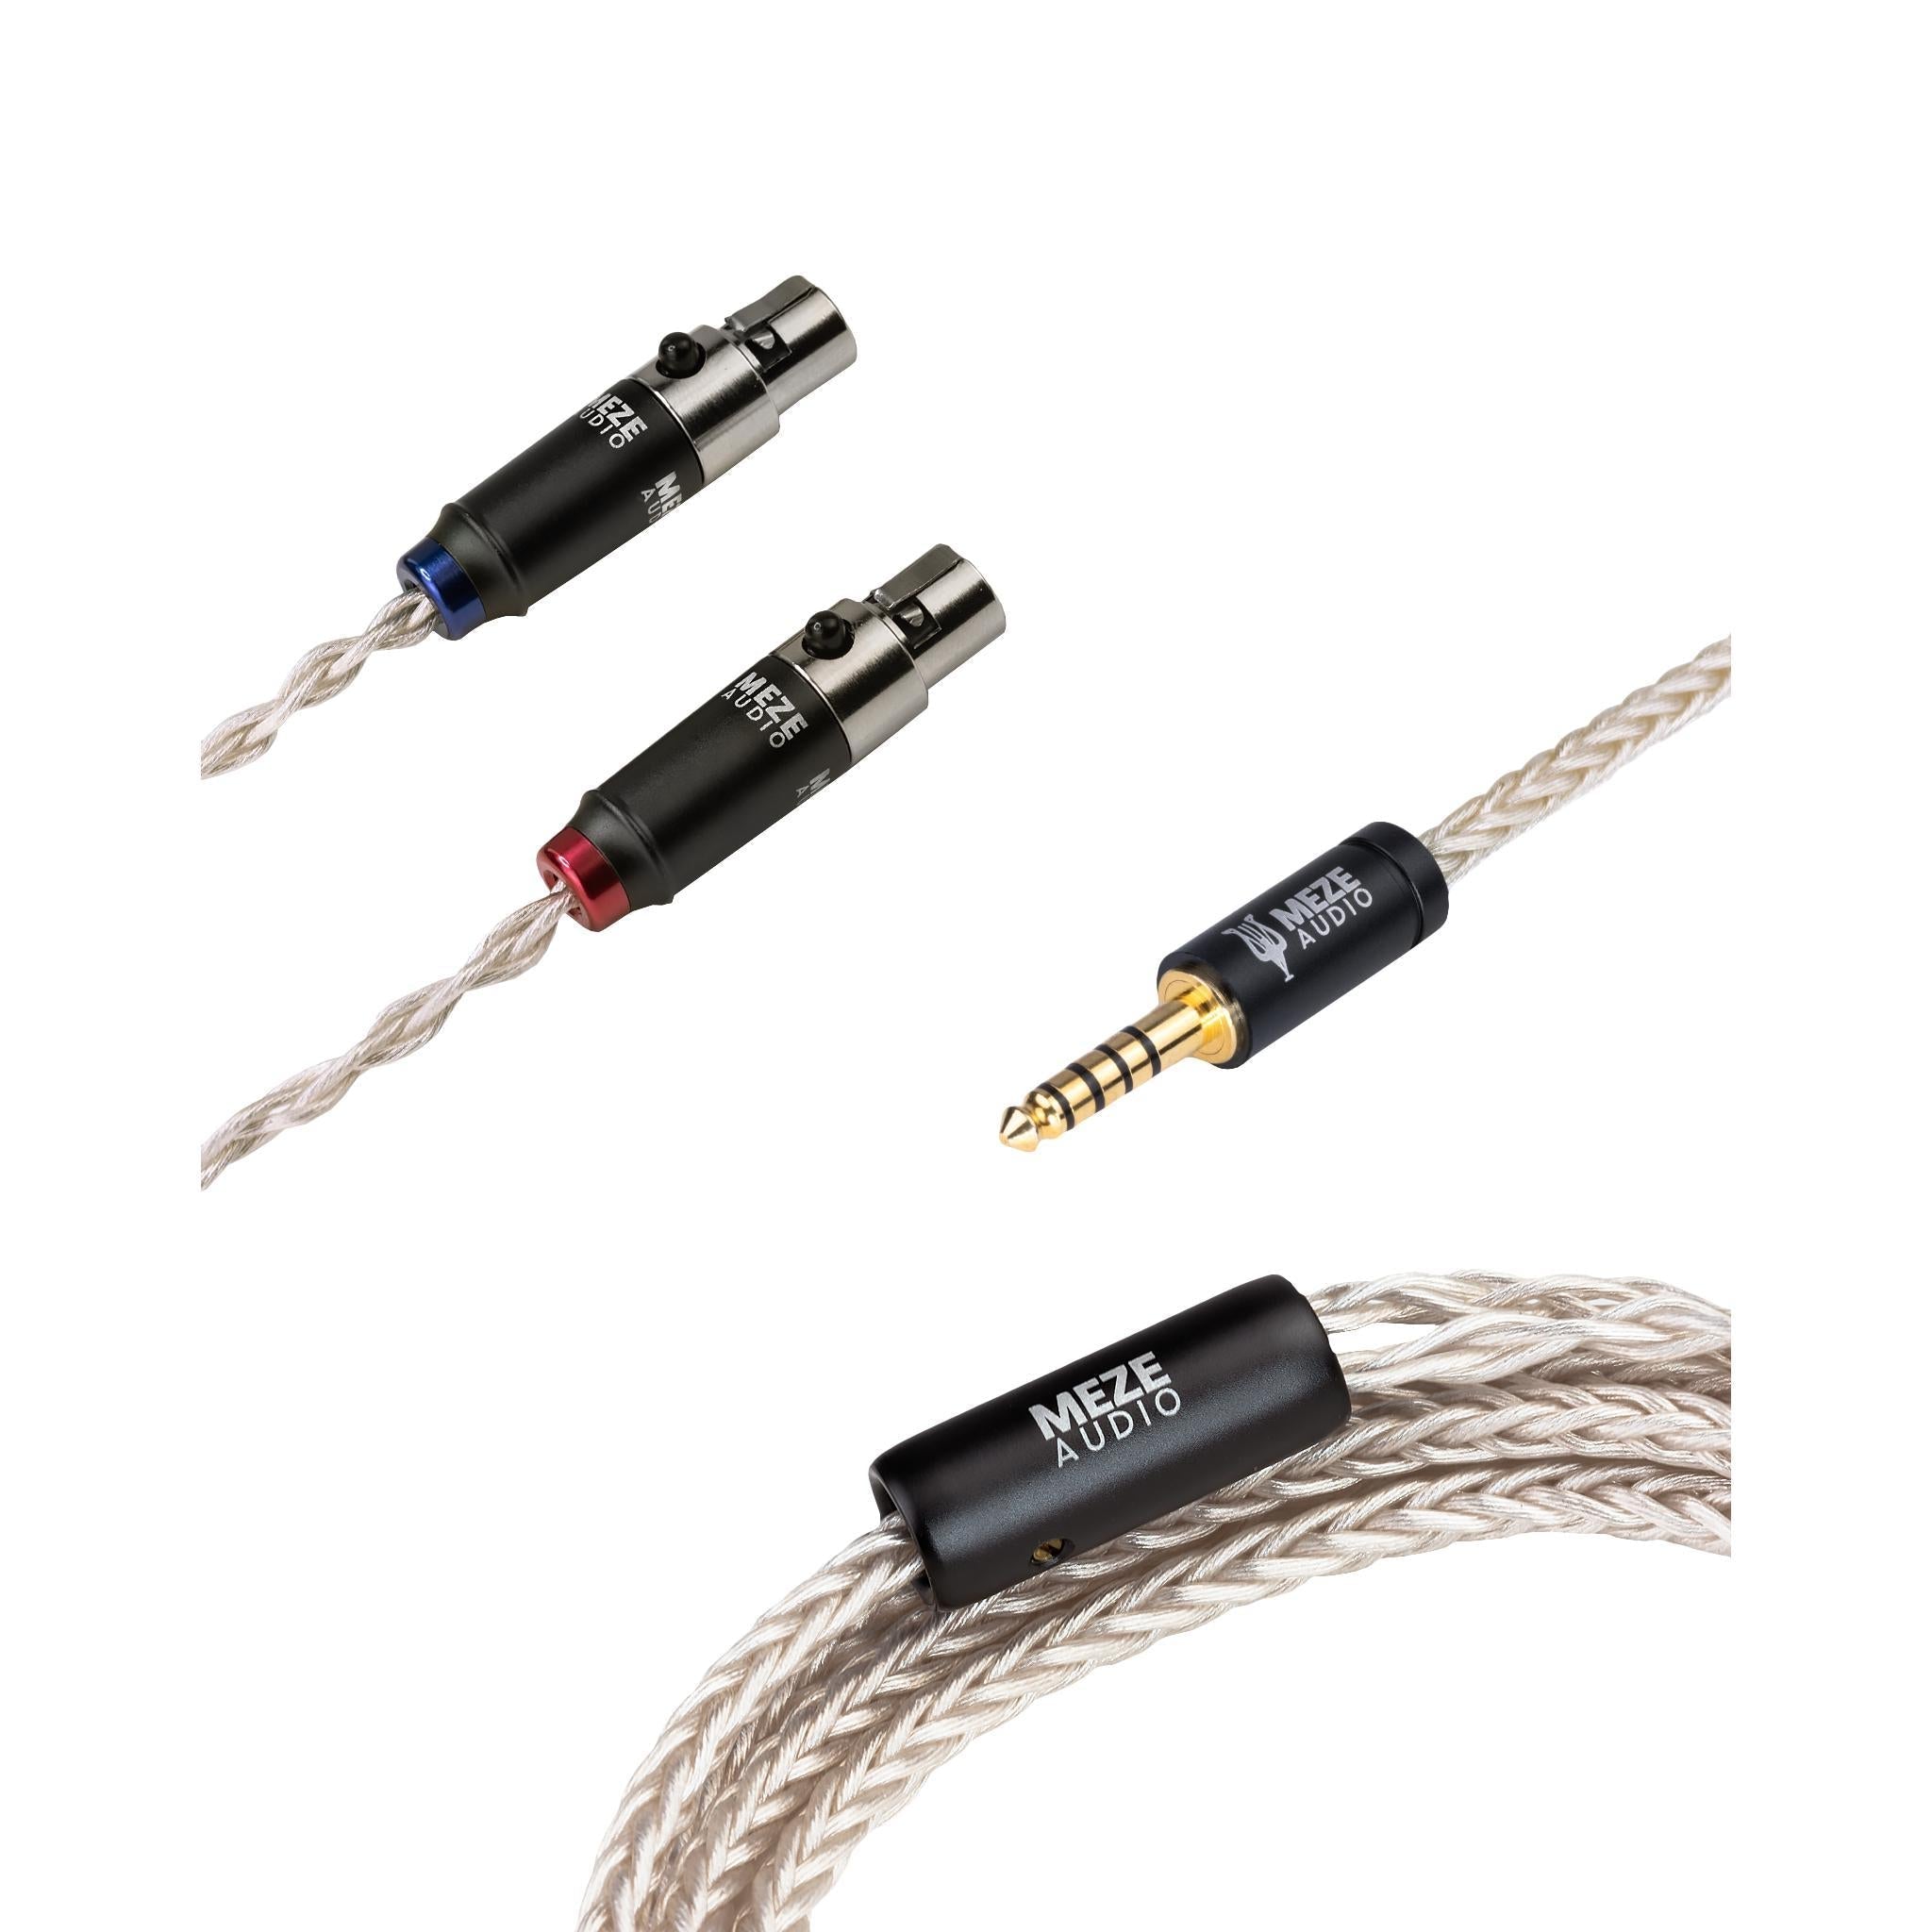 ALO audio Litz MMCX Replacement Cable for IEMs | Bloom Audio